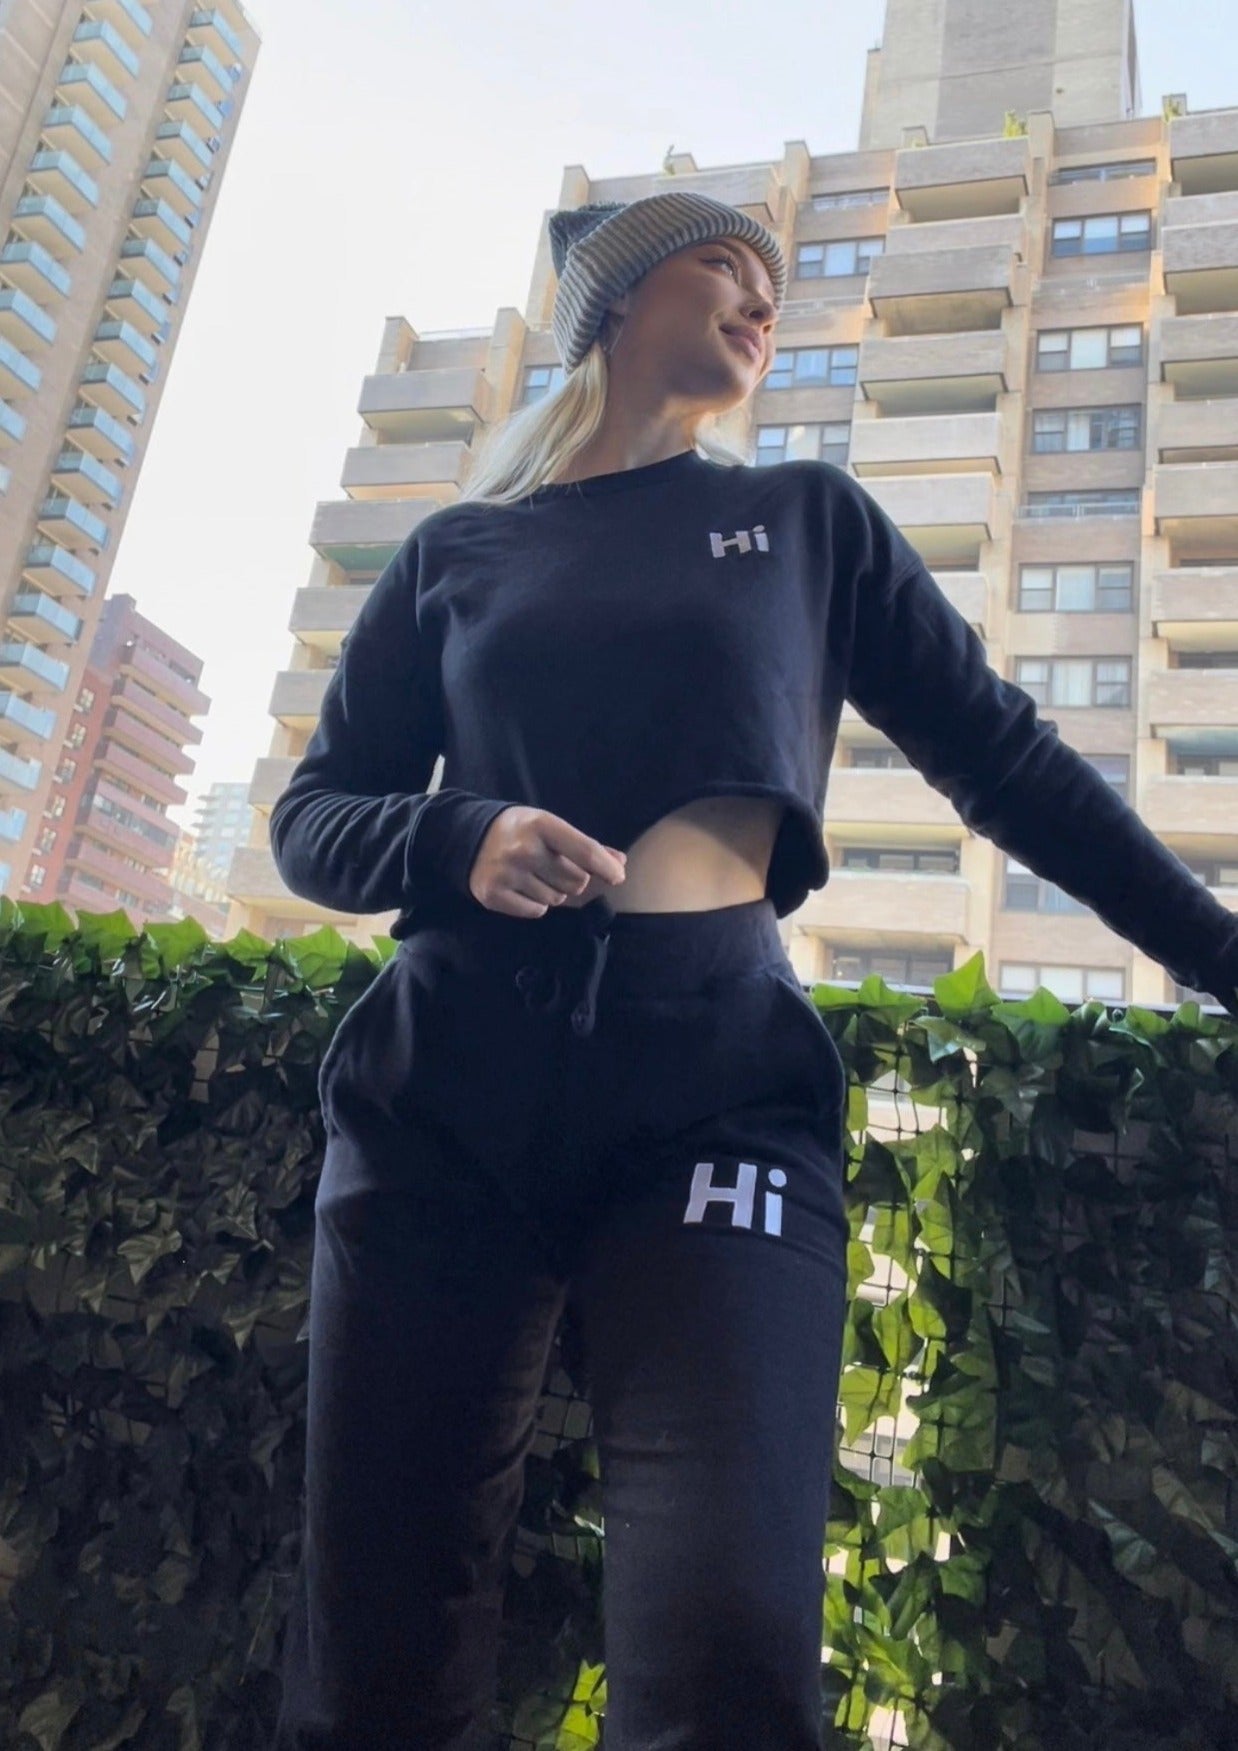 Shannon Milligan models the Hi Cropped Sweatshirt and the Hi Pom Pom Beanie and Hi Sweatpants for Happy interactions.